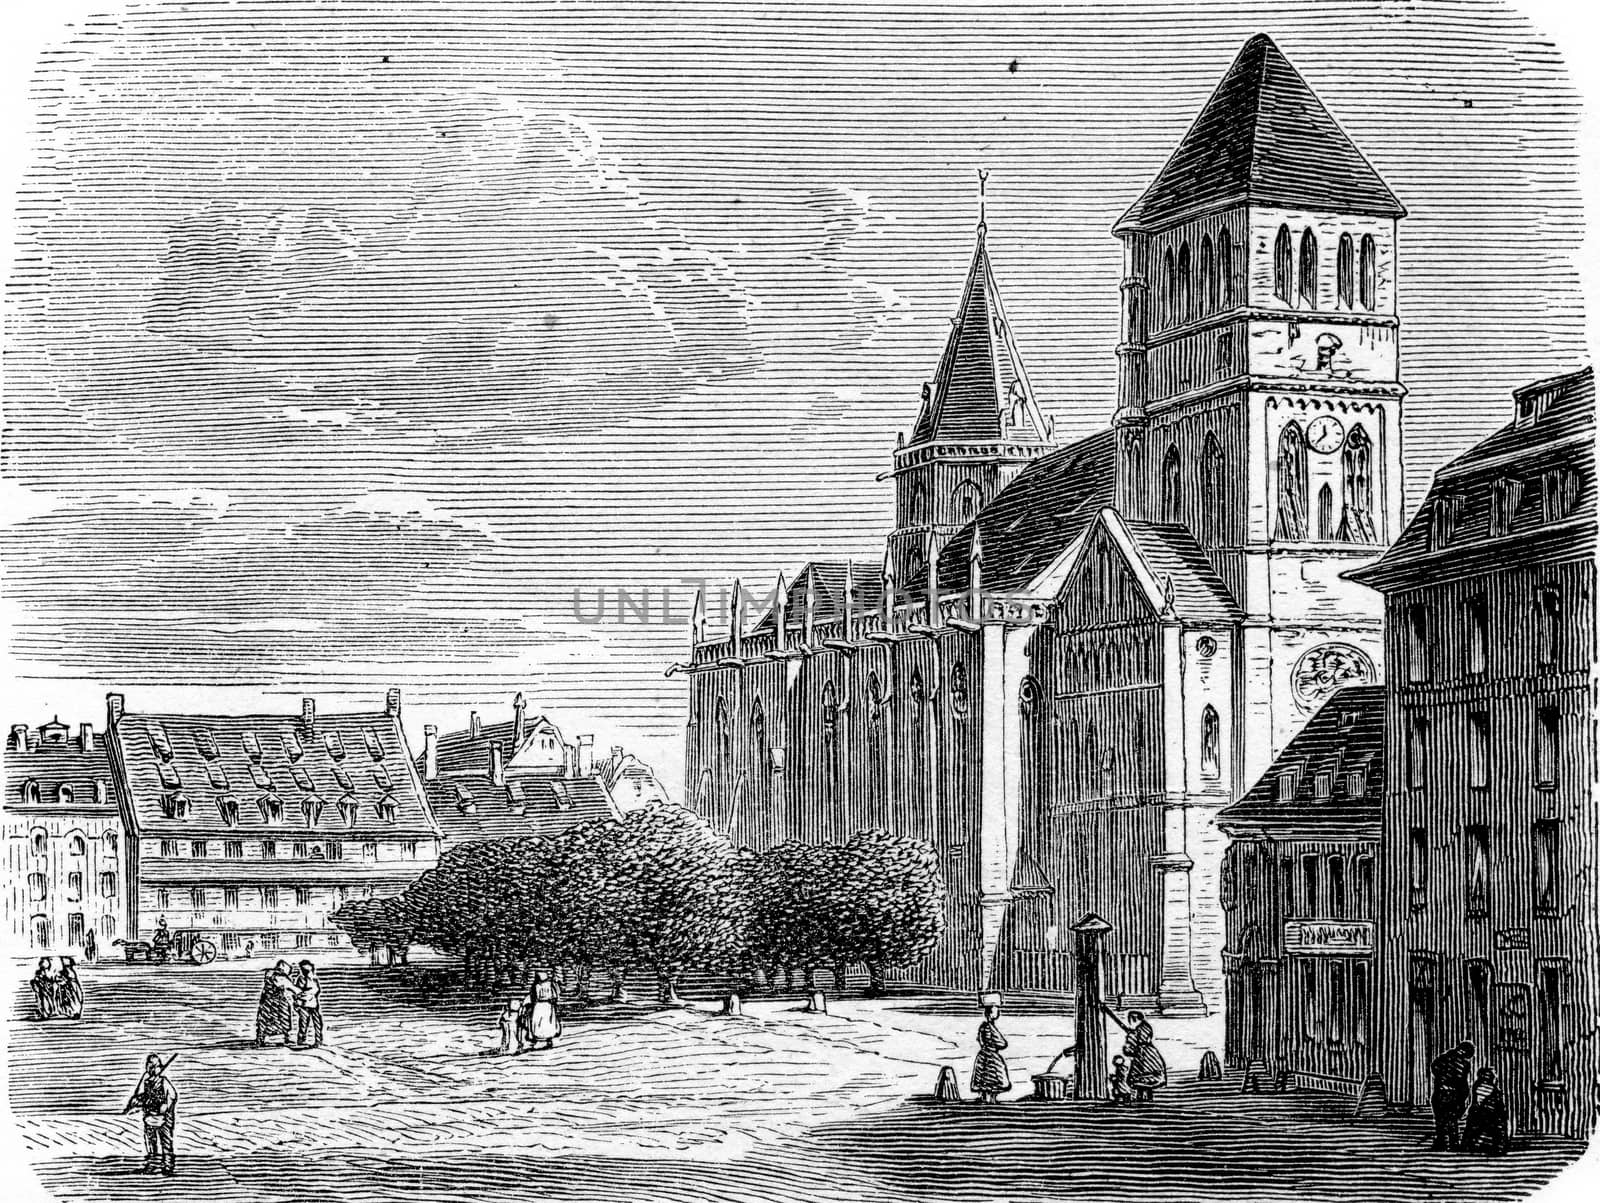 Church of Saint Thomas  in Strasbourg, Alsace, France. From Chemin des Ecoliers, vintage engraving, 1876.
